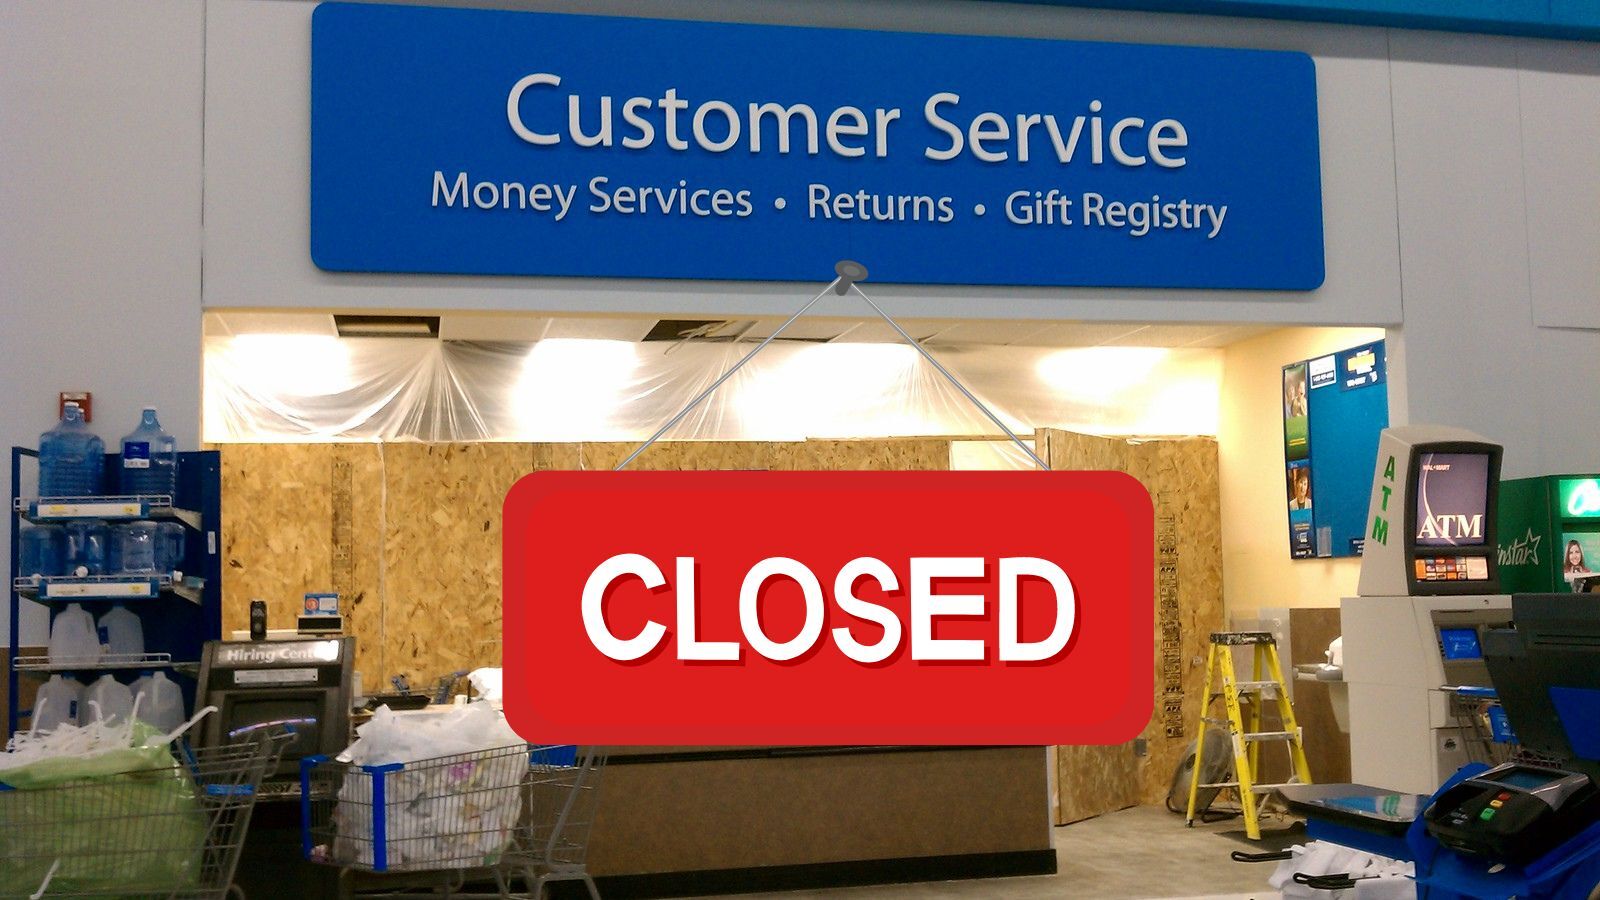 What Time Does Customer Service Close at Walmart? (And More...)